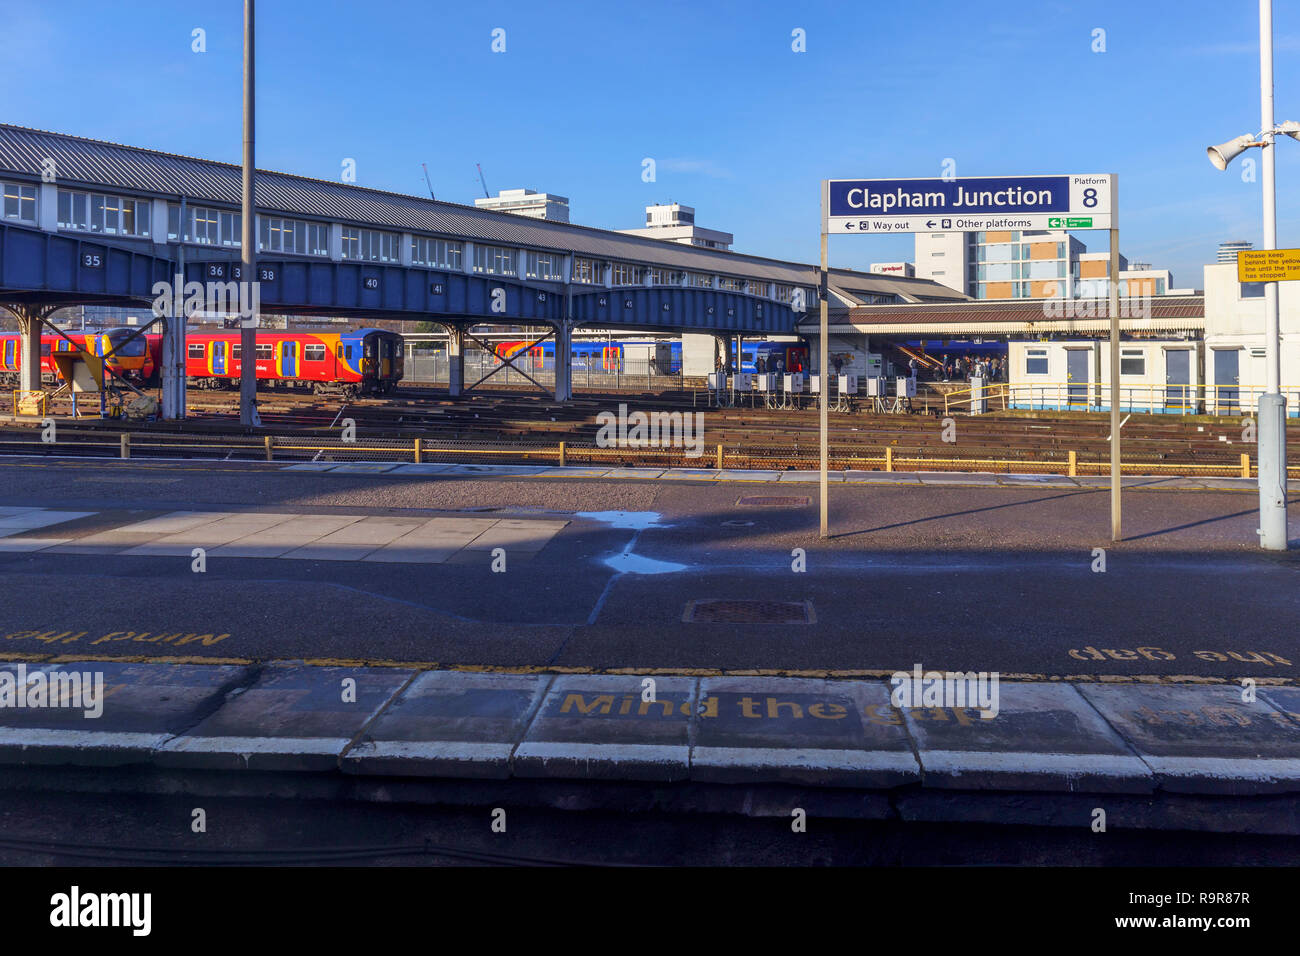 Platform name board at Clapham Junction railway station and transport hub near St John's Hill in south-west Battersea, London Borough of Wandsworth Stock Photo